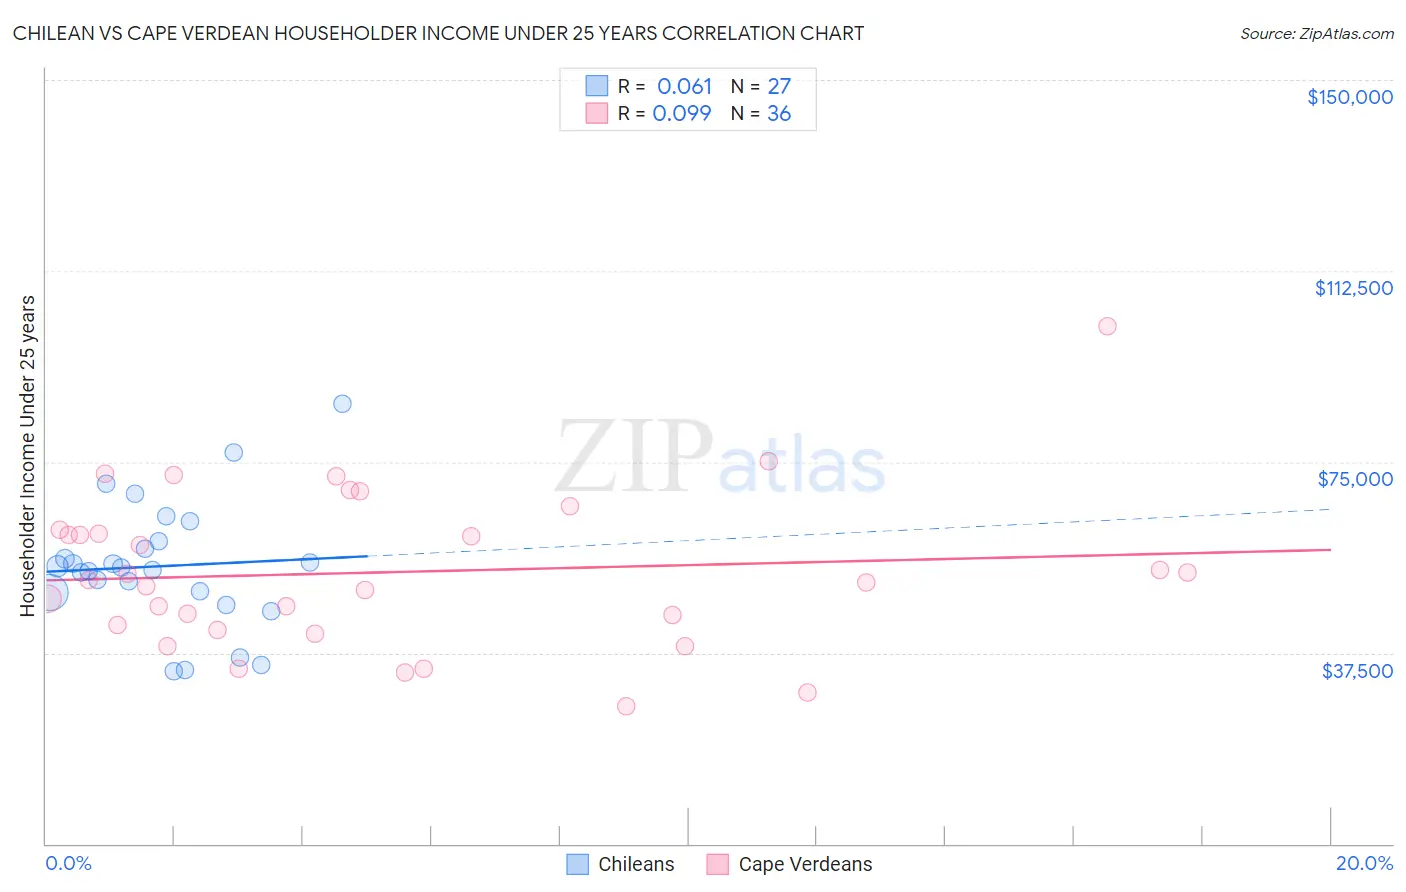 Chilean vs Cape Verdean Householder Income Under 25 years